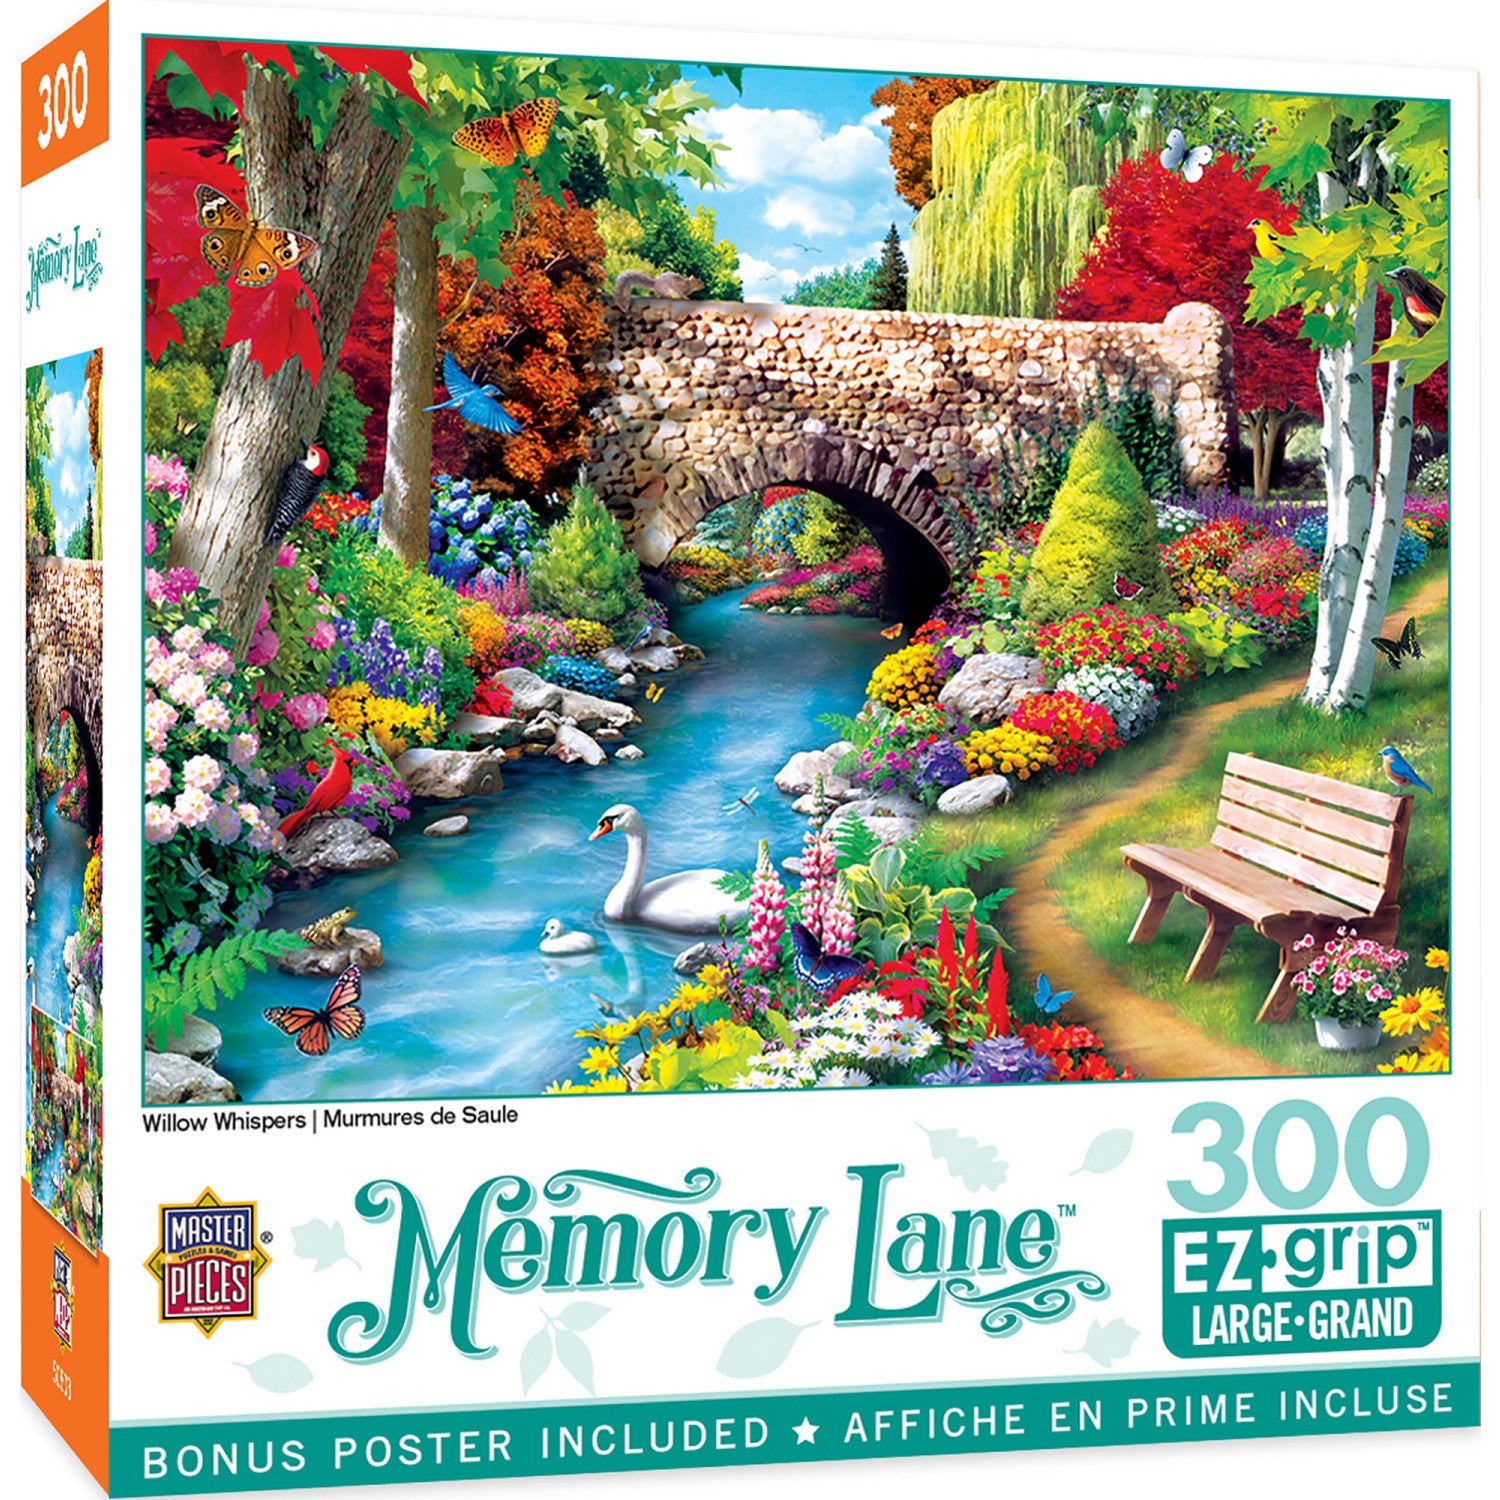 Memory Lane - Willow Whispers 300 Piece EZ Grip Jigsaw Puzzle